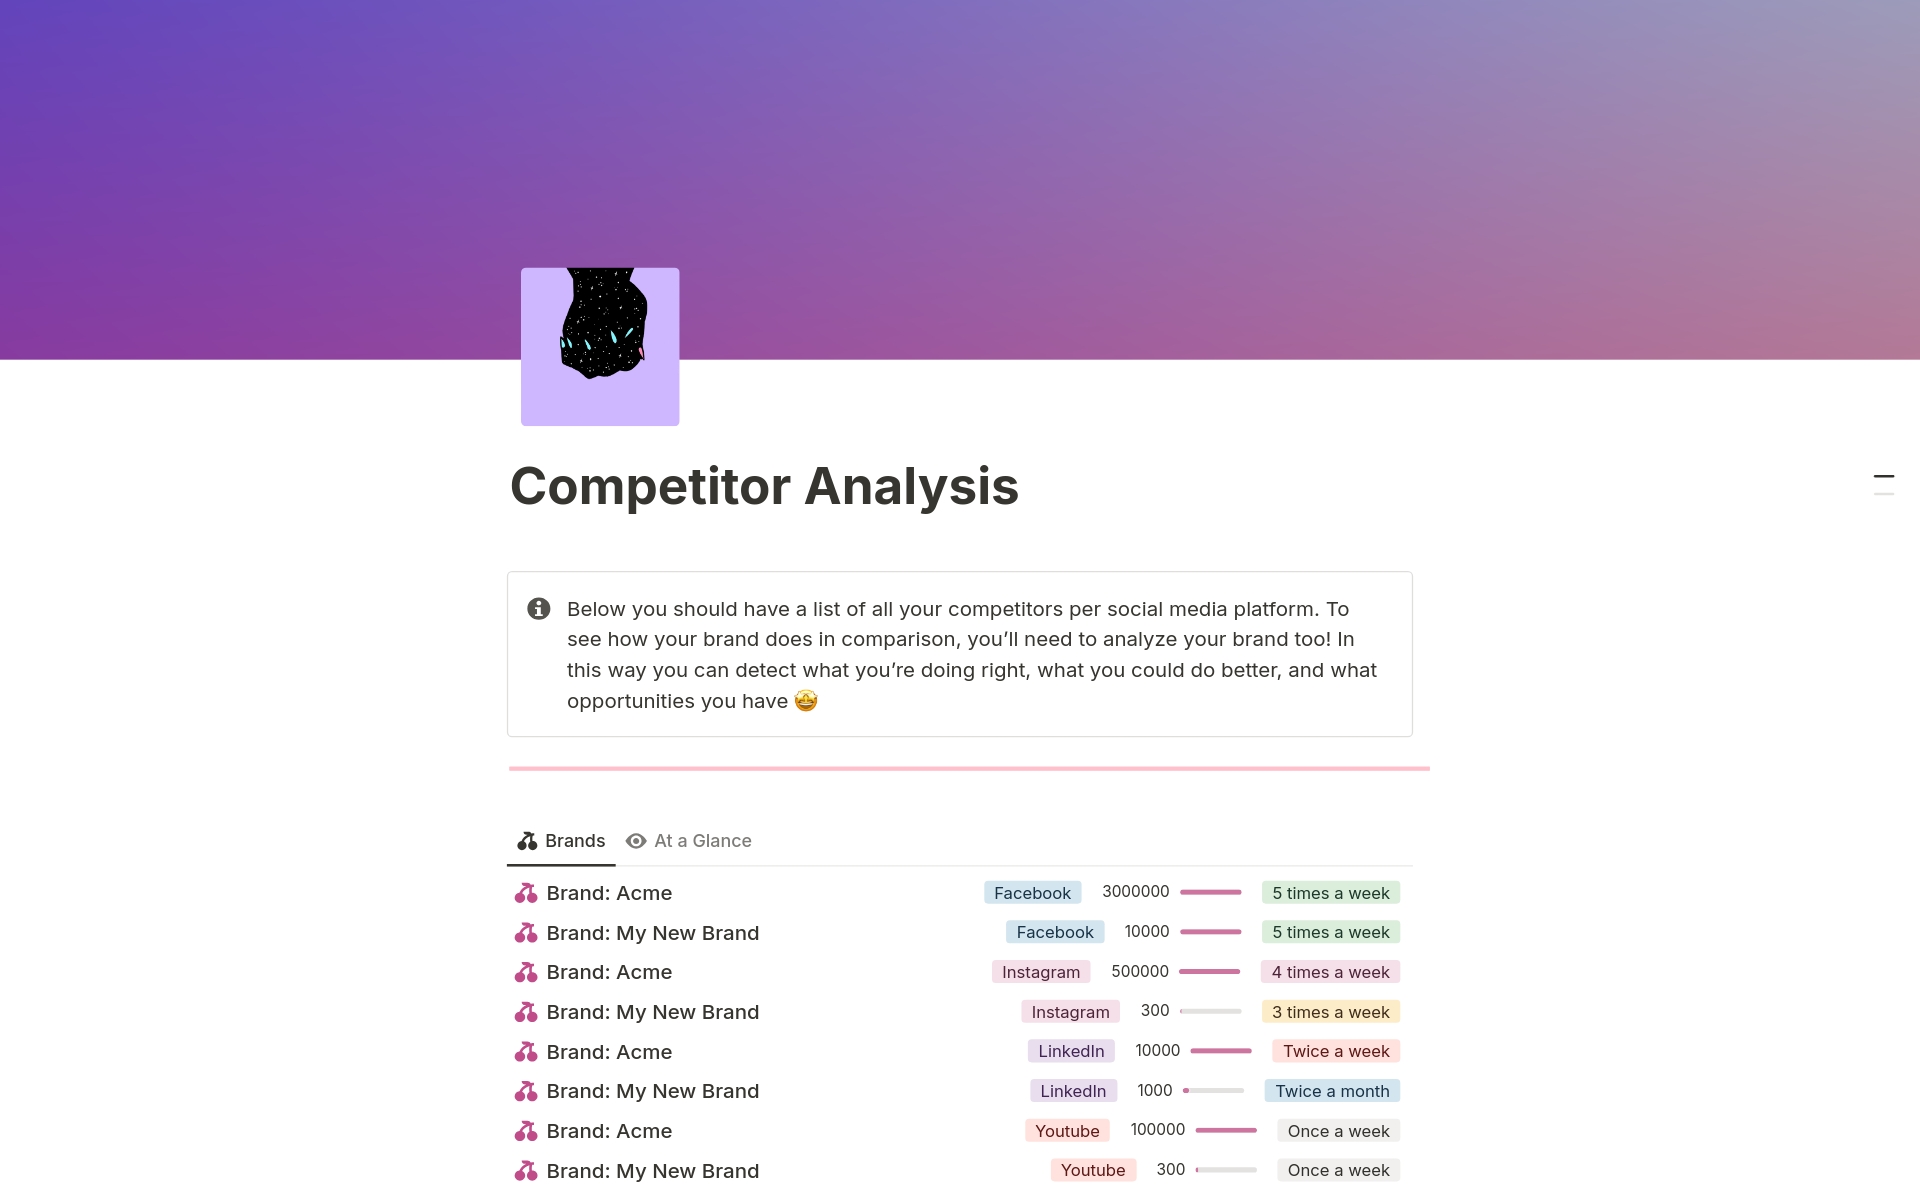 Social media planner + strategy planner + competitor analysis notion template. It has everything you need to plan your social media strategy and your posts across social media platforms and succeed! It's easy to use and has many essentials at a glance.